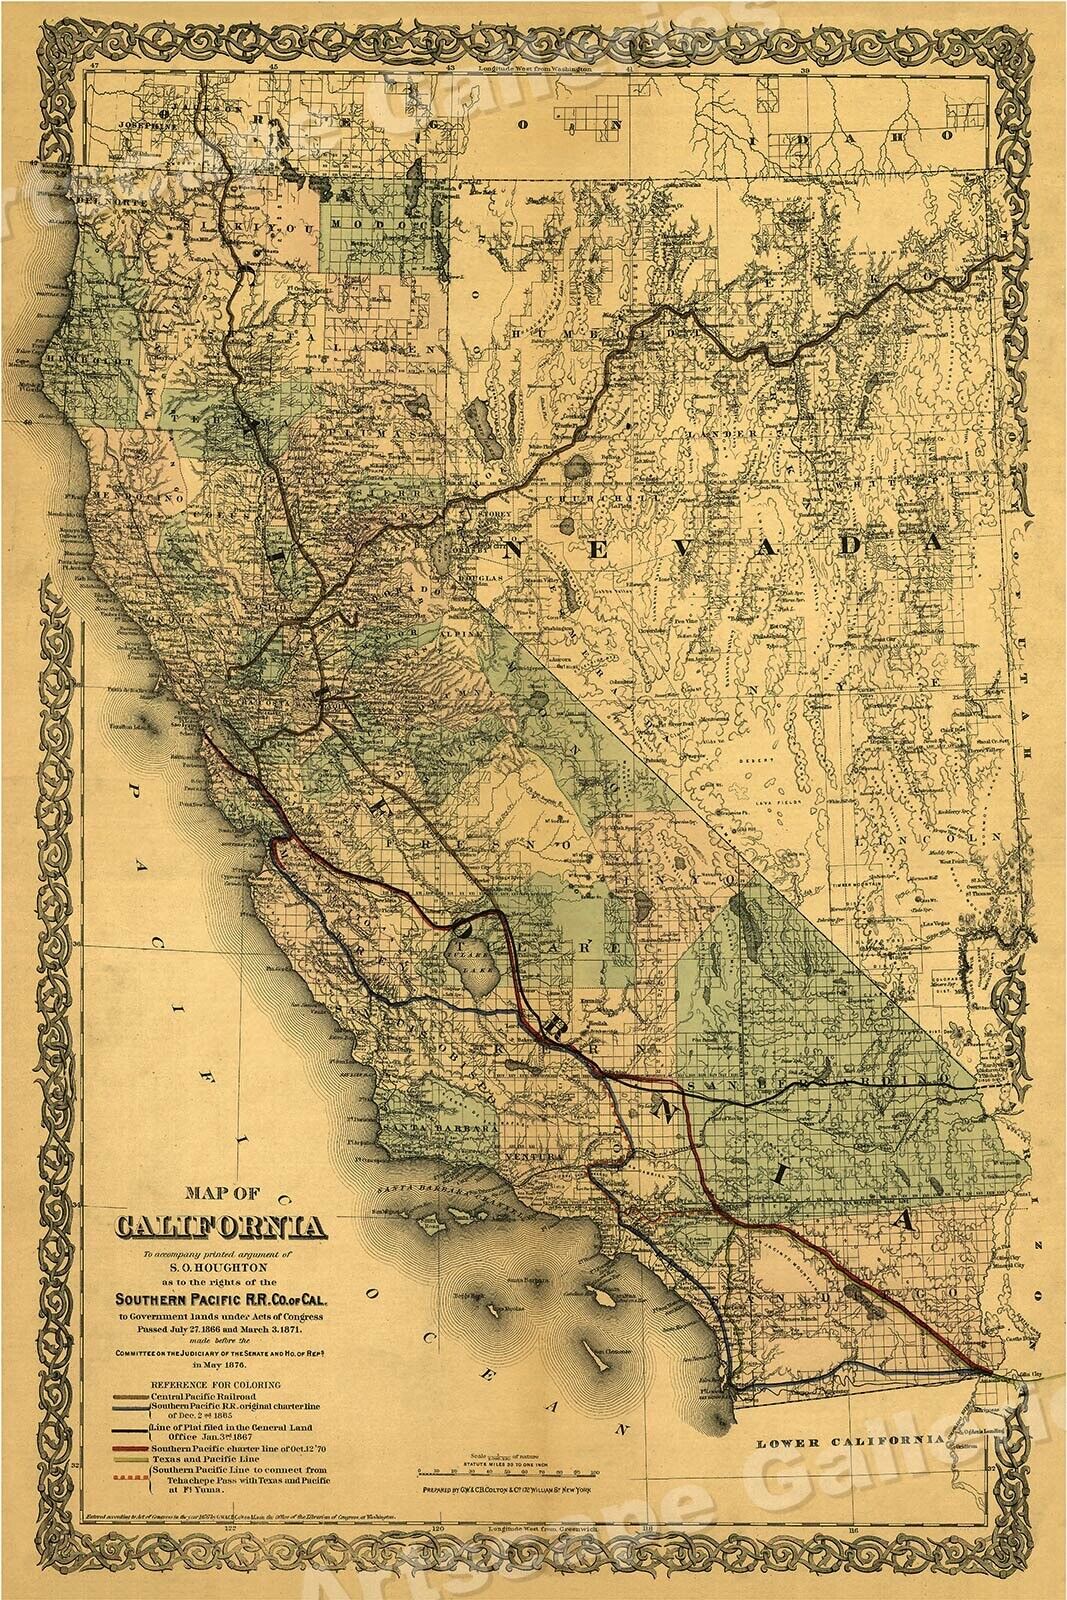 California and Southern Pacific Rail Line Vintage Map - 20x30